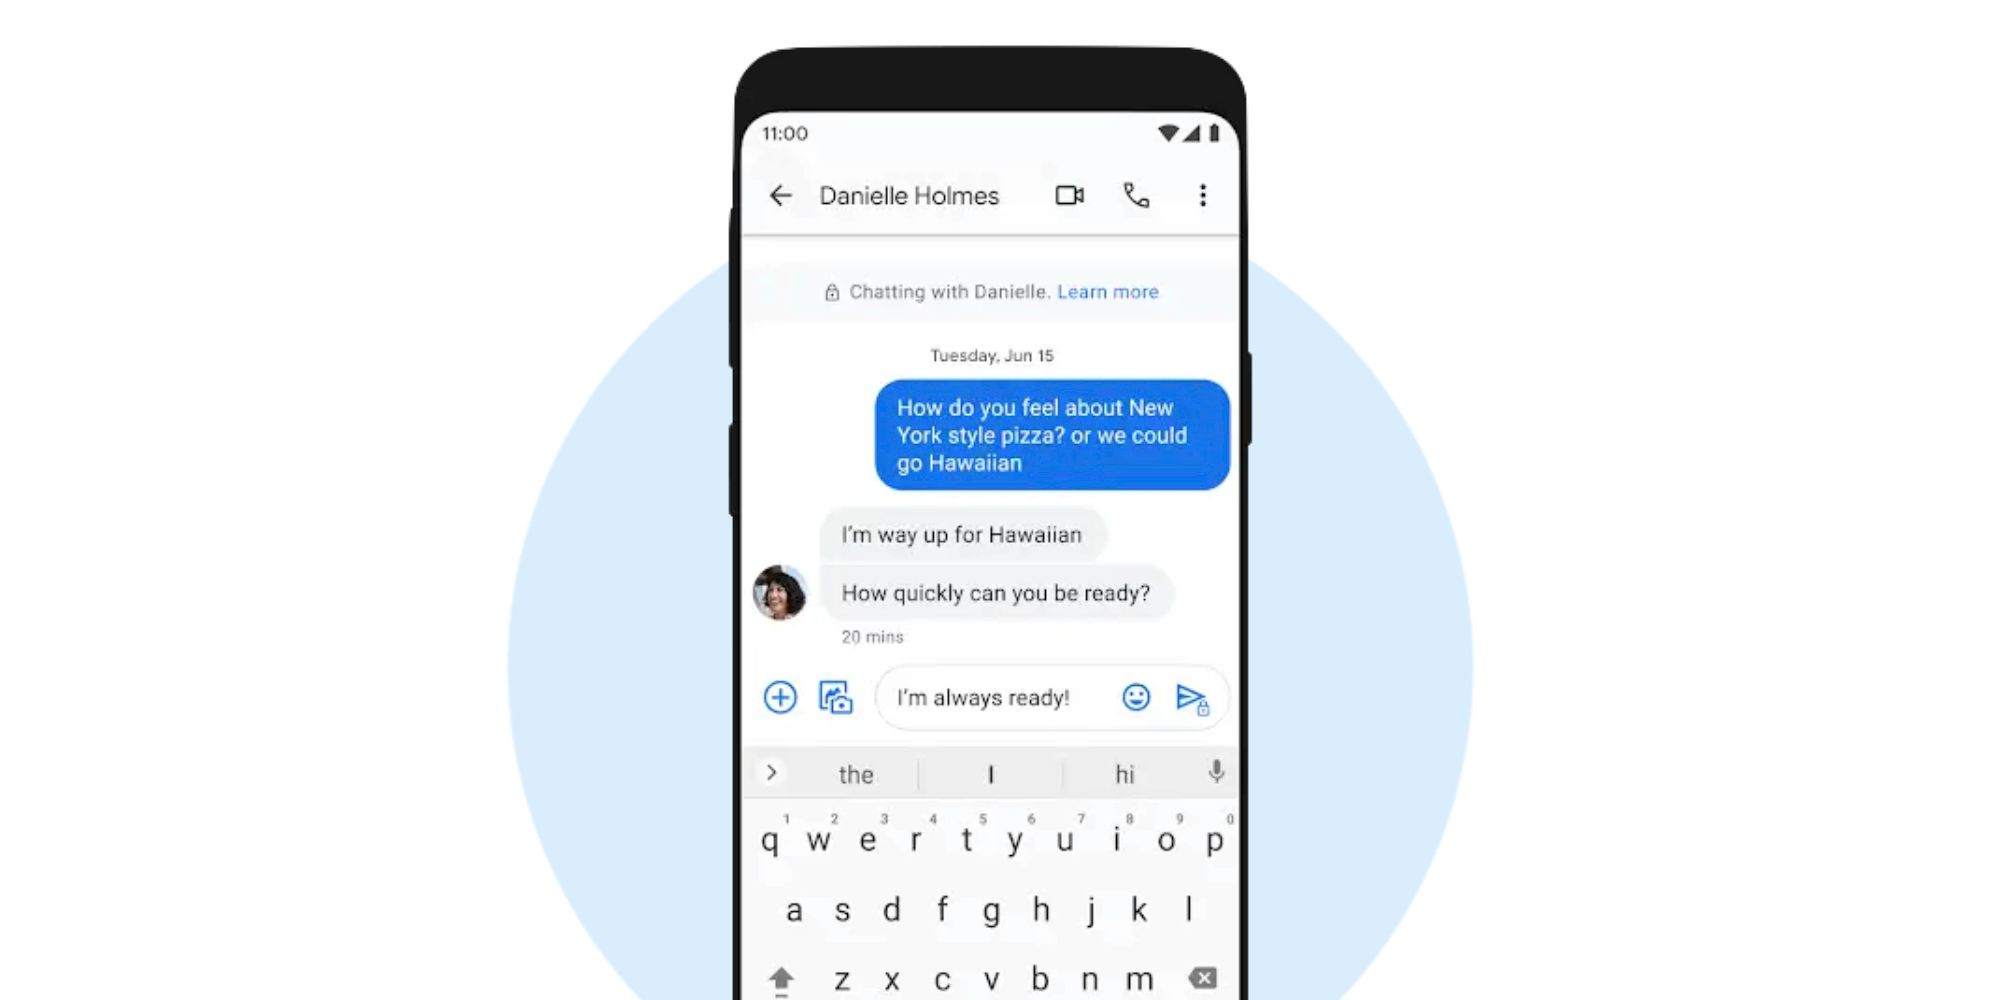 End-to-end encryption in Google Messages